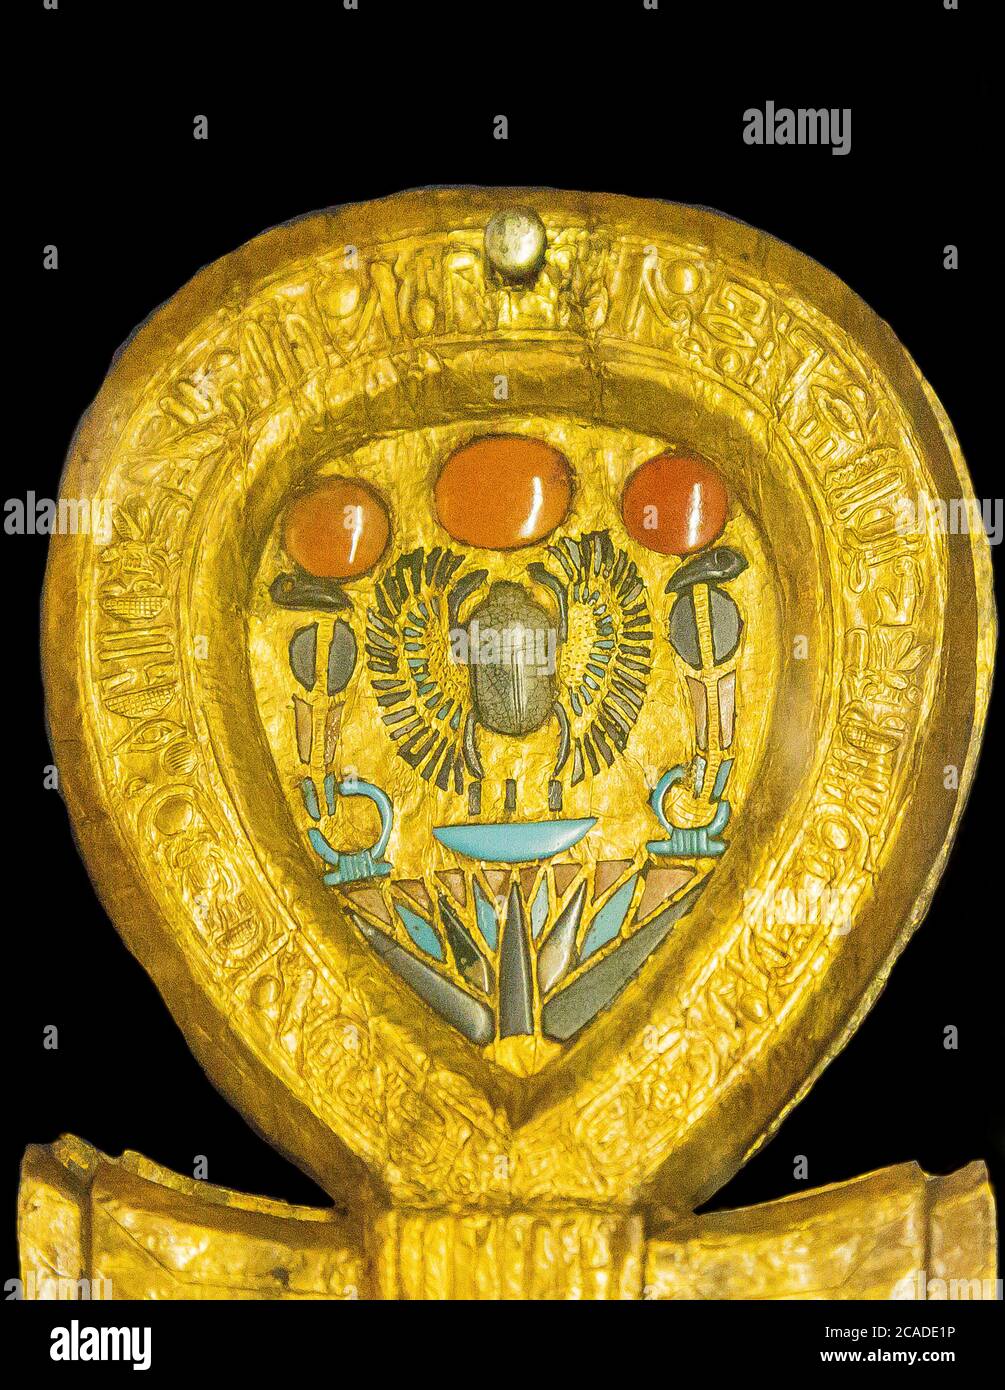 Egypt, Cairo, Tutankhamon jewellery : Mirror case in the shape of an Ankh sign. Inside the loop, a winged scarab. Stock Photo